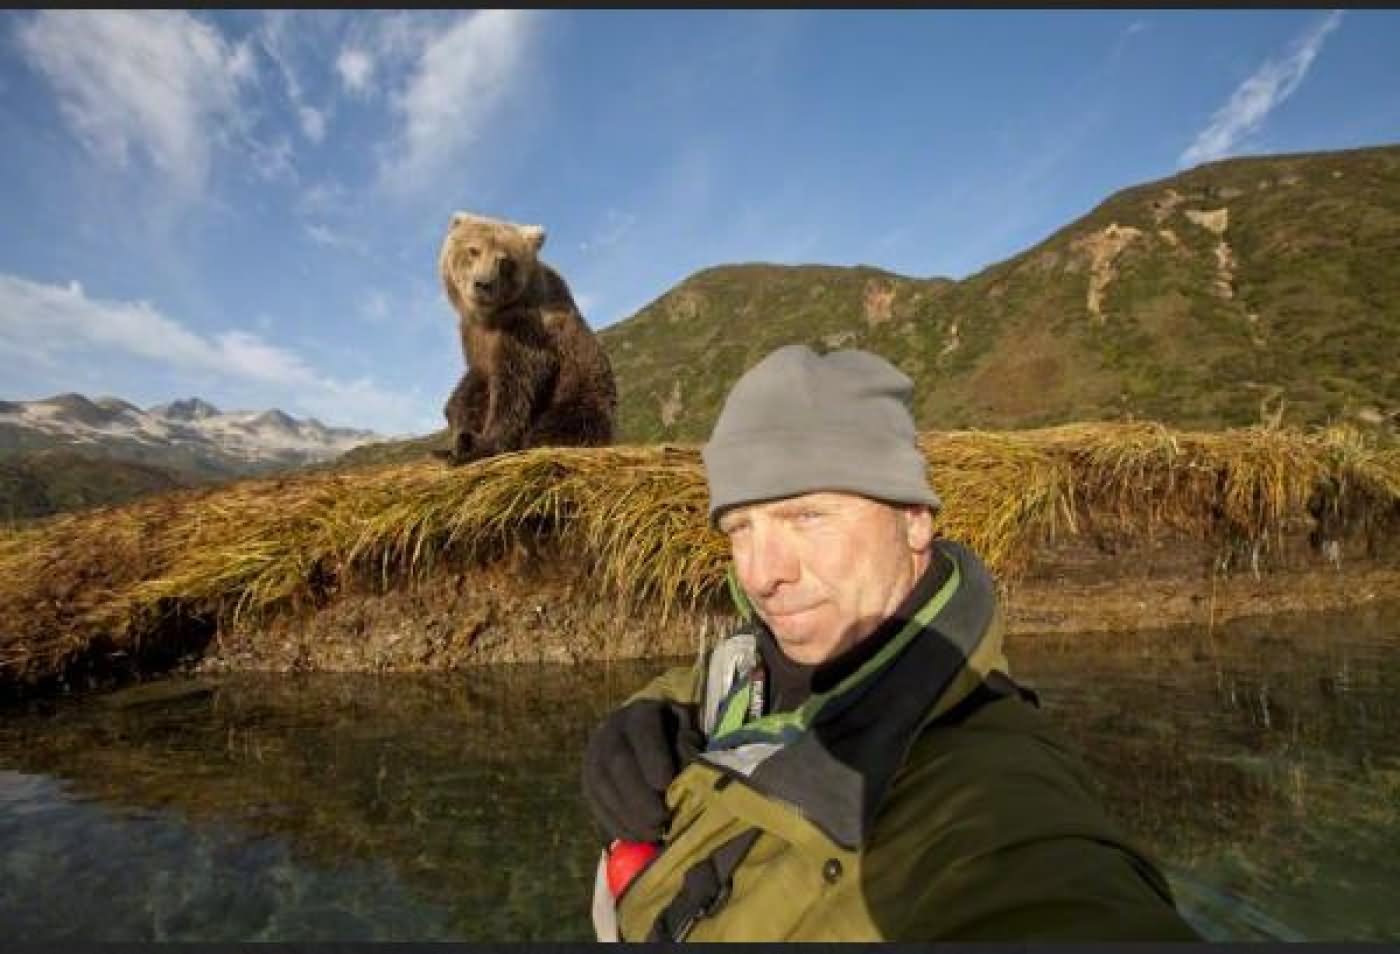 Man Taking Selfie With Bear Funny Dangerous Picture